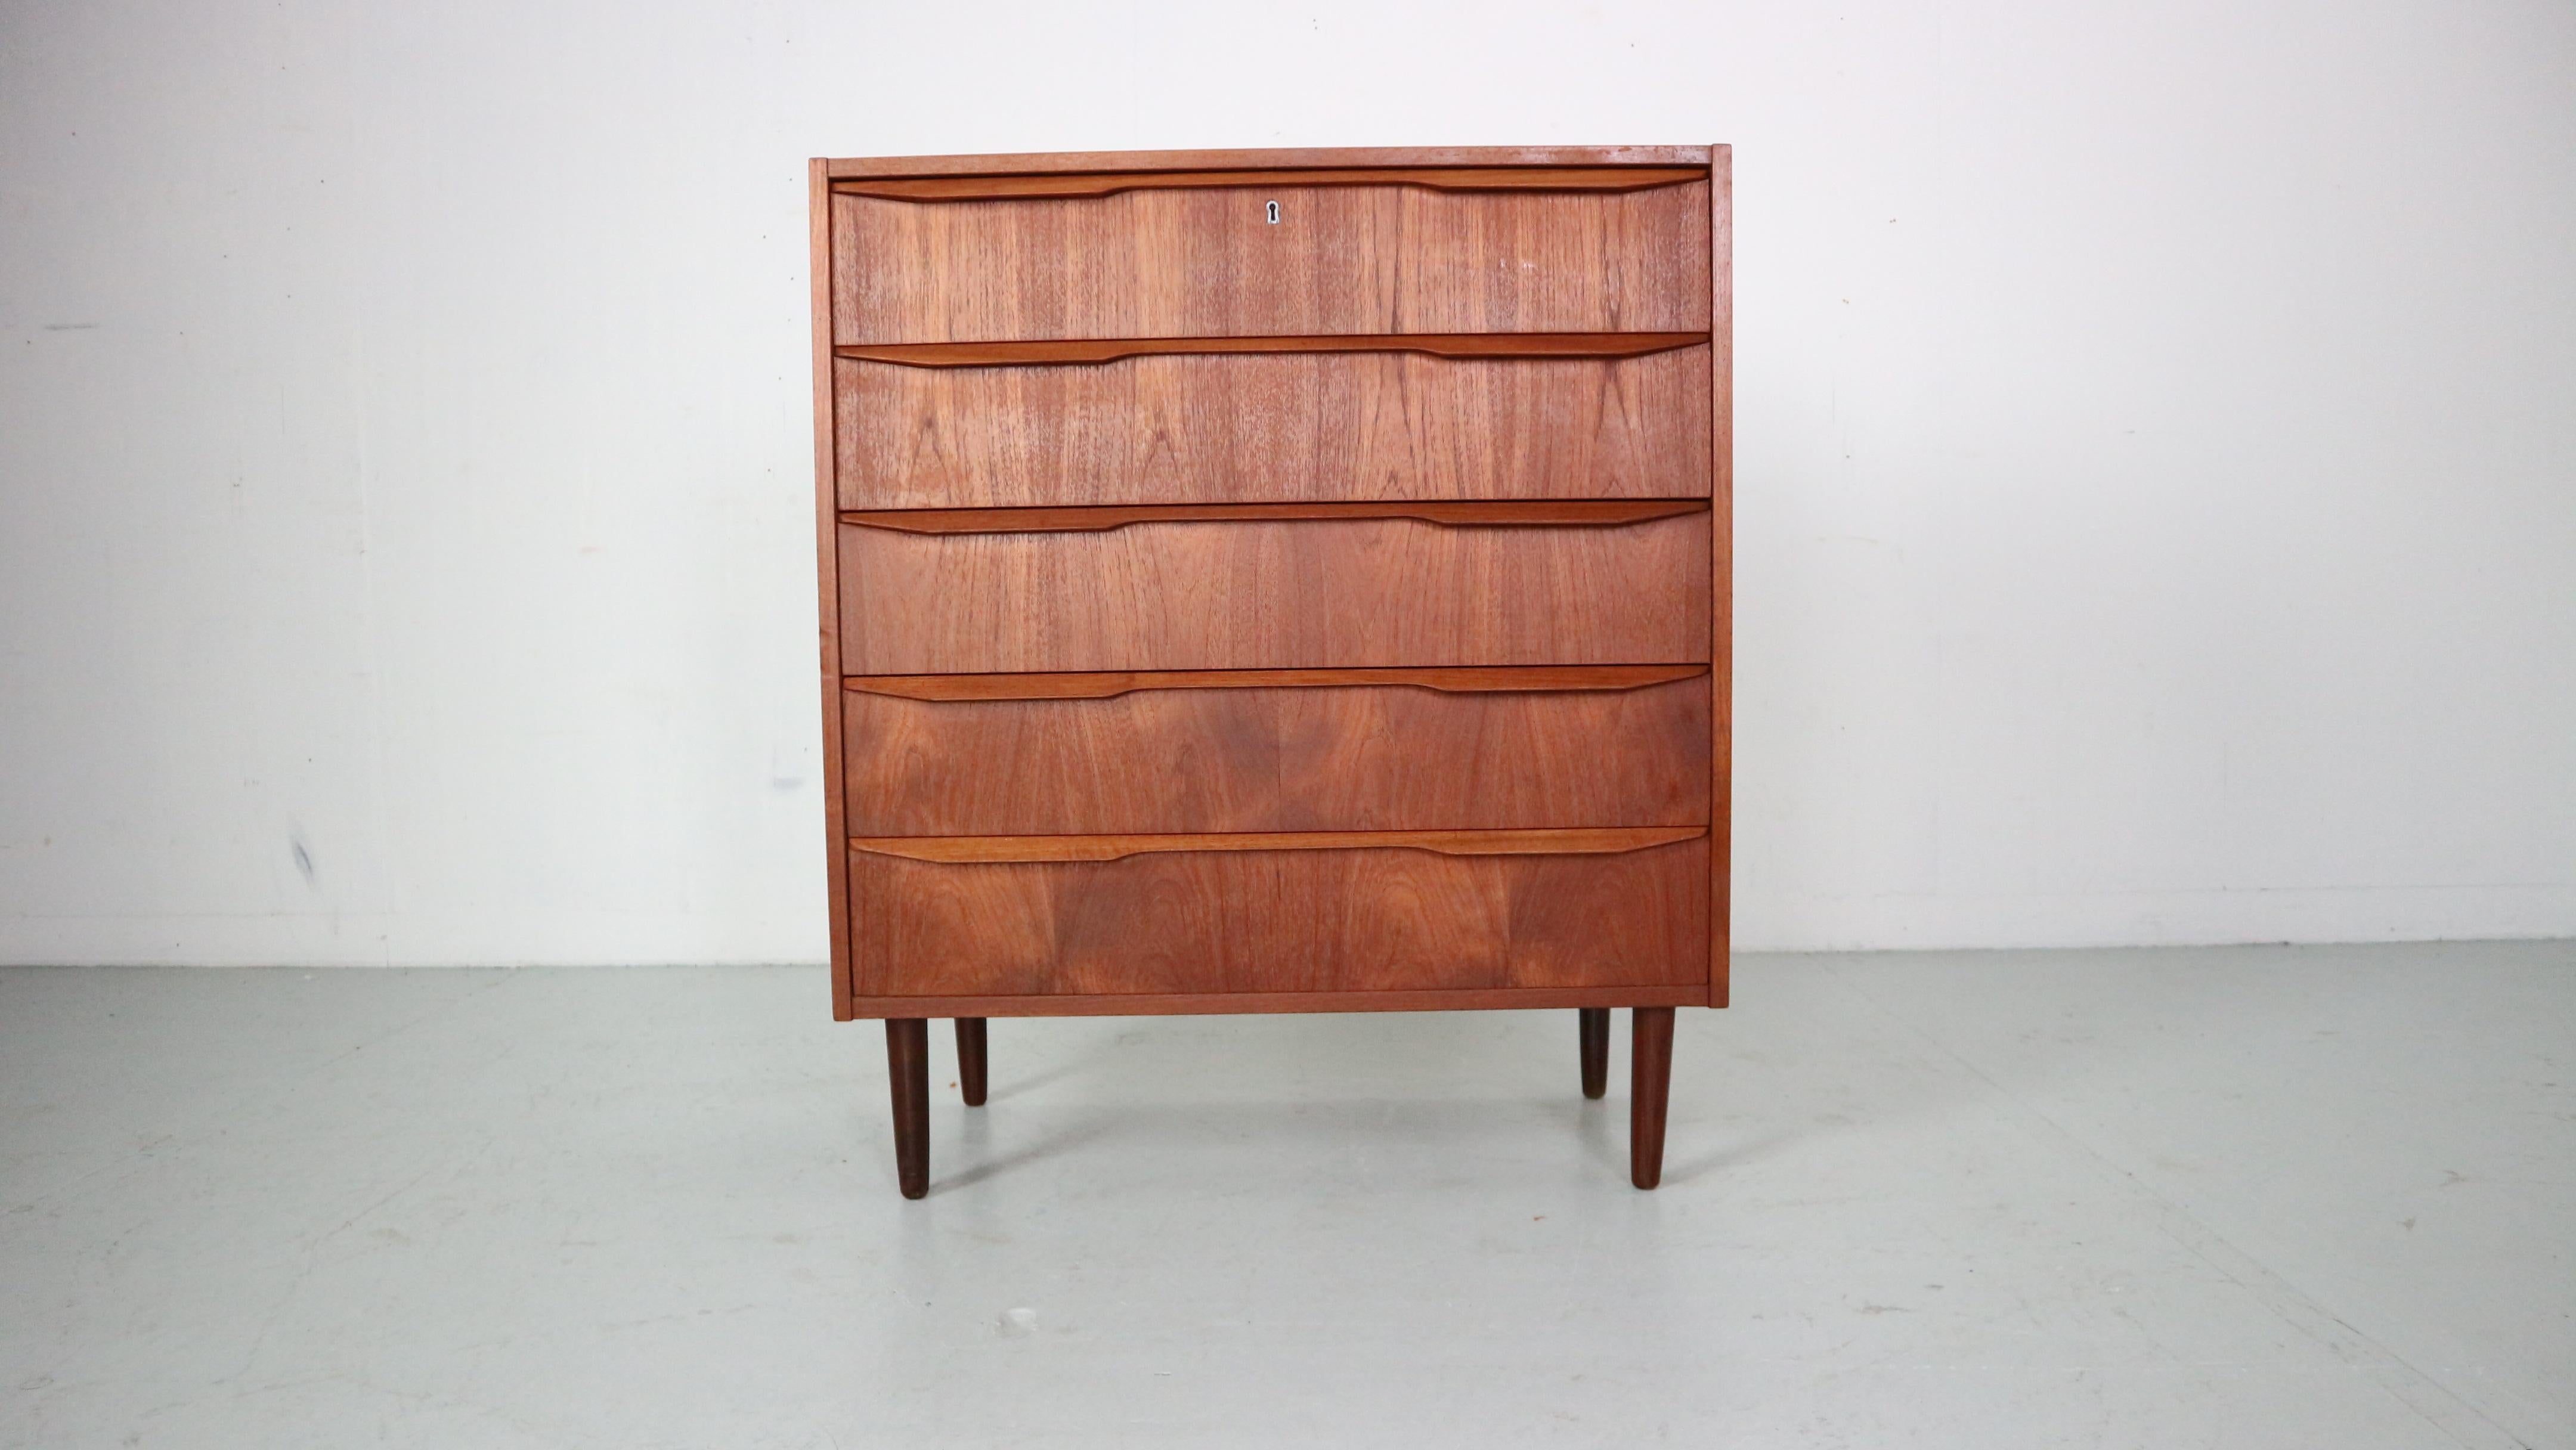 Mid- Century modern period chest of 5 drawers or tallboy cabinet made in 1960's Denmark.

Made of teak wood veneer. Elegant handles and good working drawers.
High quality Danish furniture.

The cabinet is in a good vintage condition.
It has been